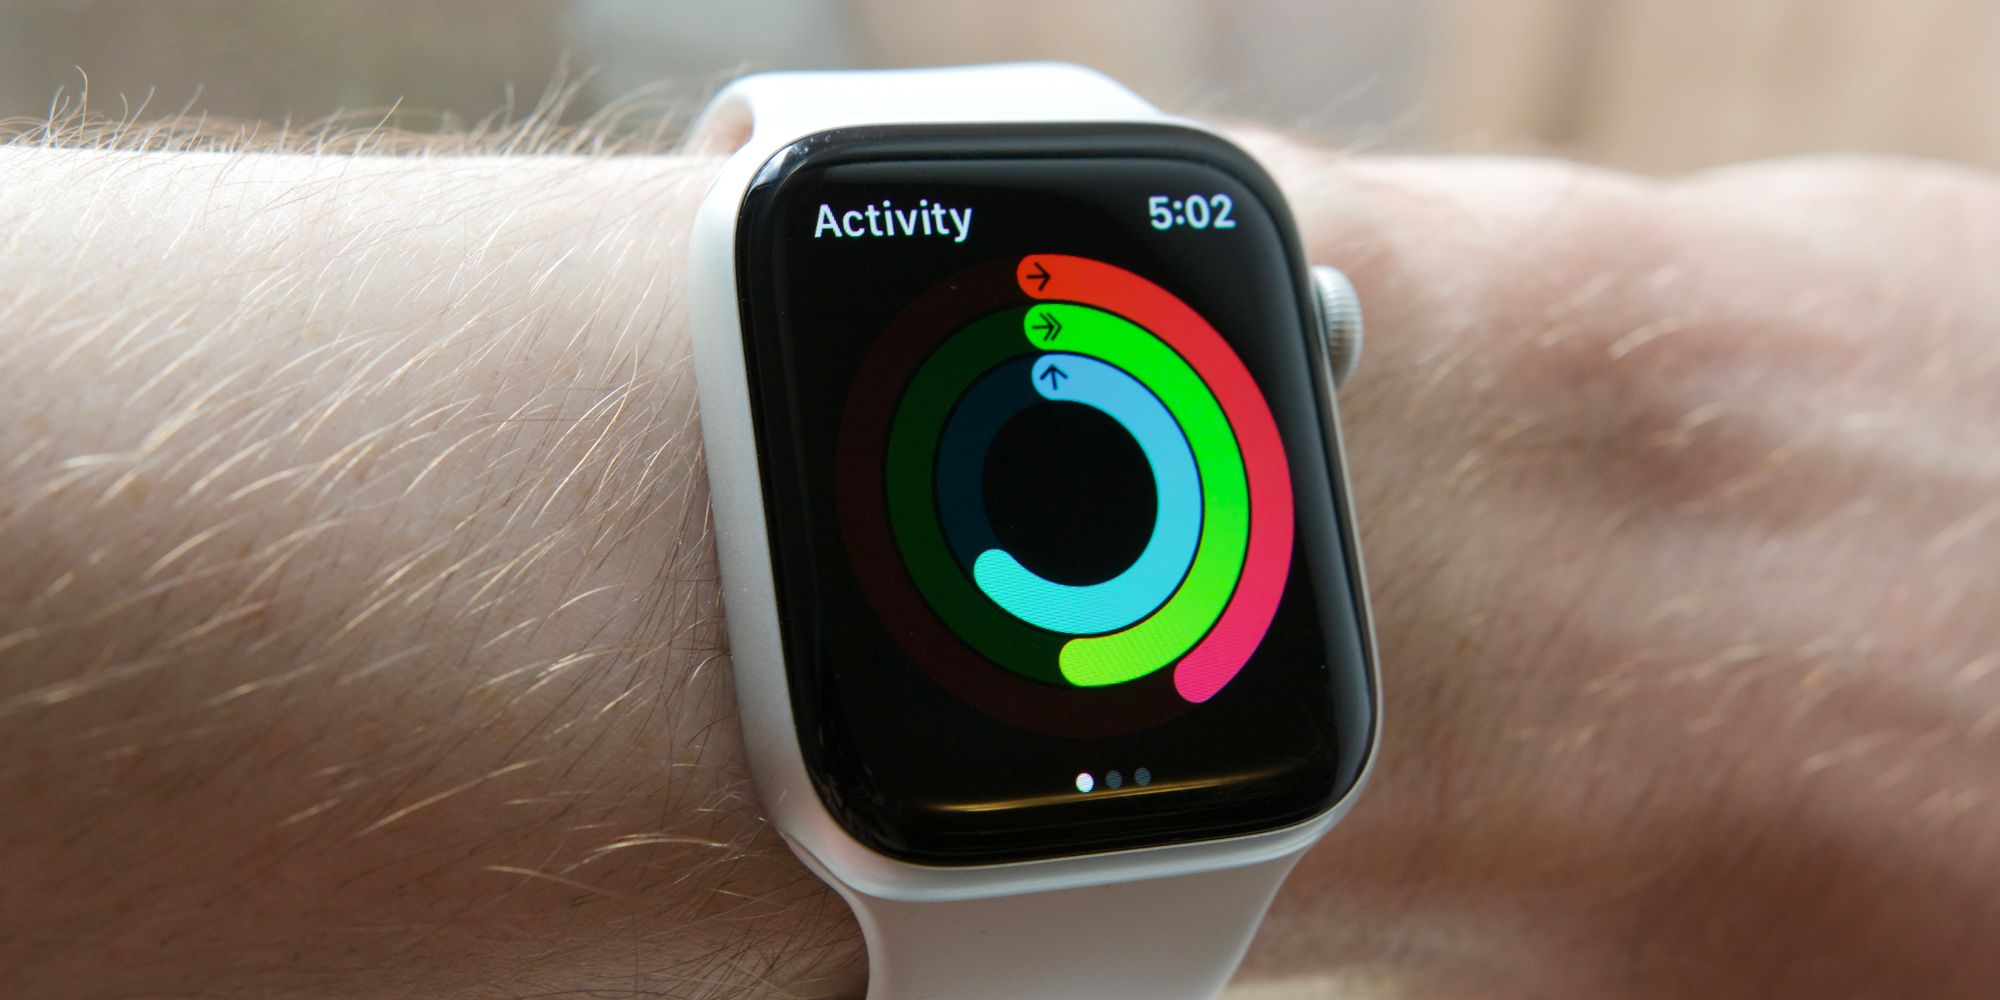 Apple Watch showing the Activity app